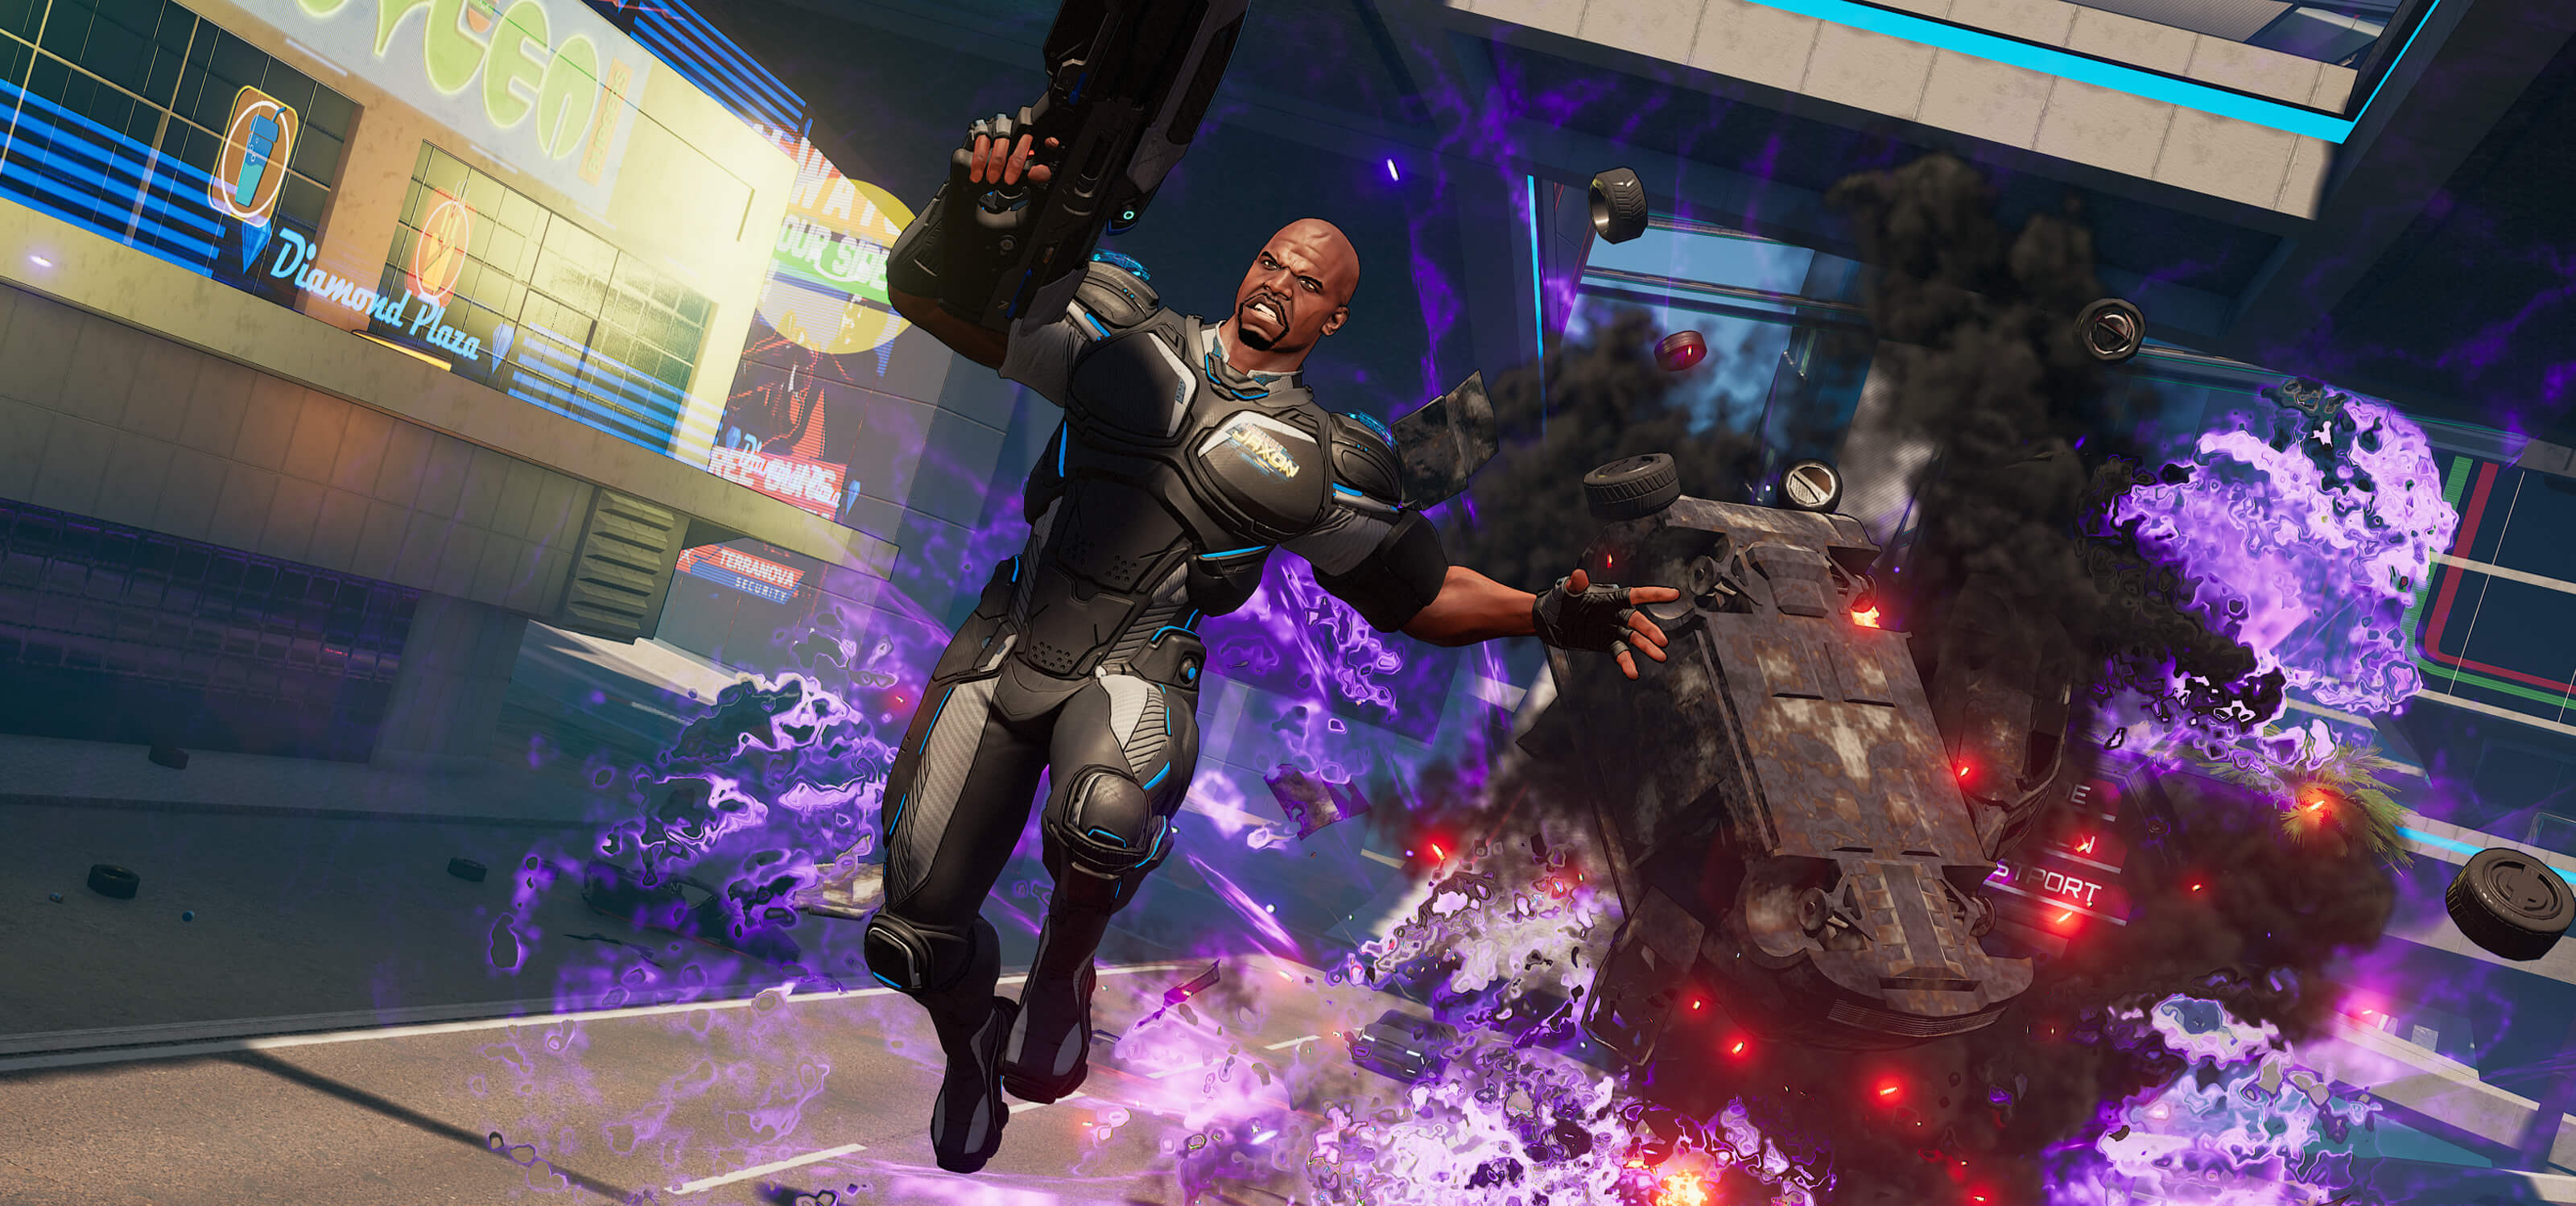 A man in a futuristic black jumpsuit leaps away from a purple-hued explosion of a truck overturning behind him on a road